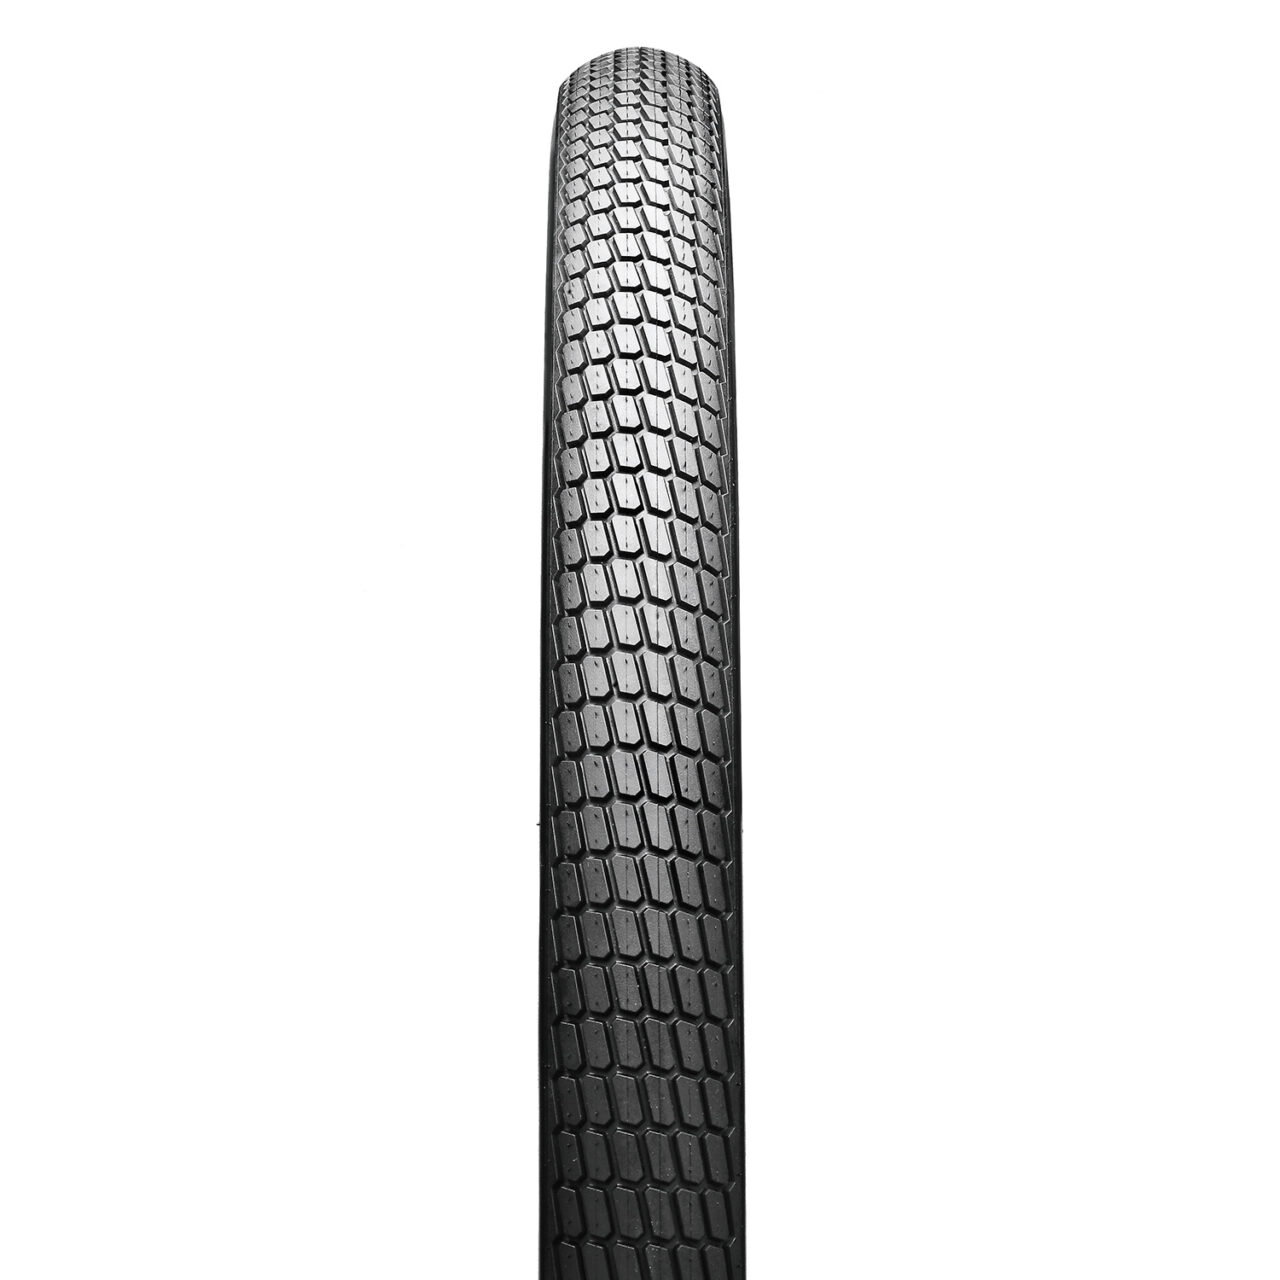 Maxxis DTR-1 bicycle tire tread